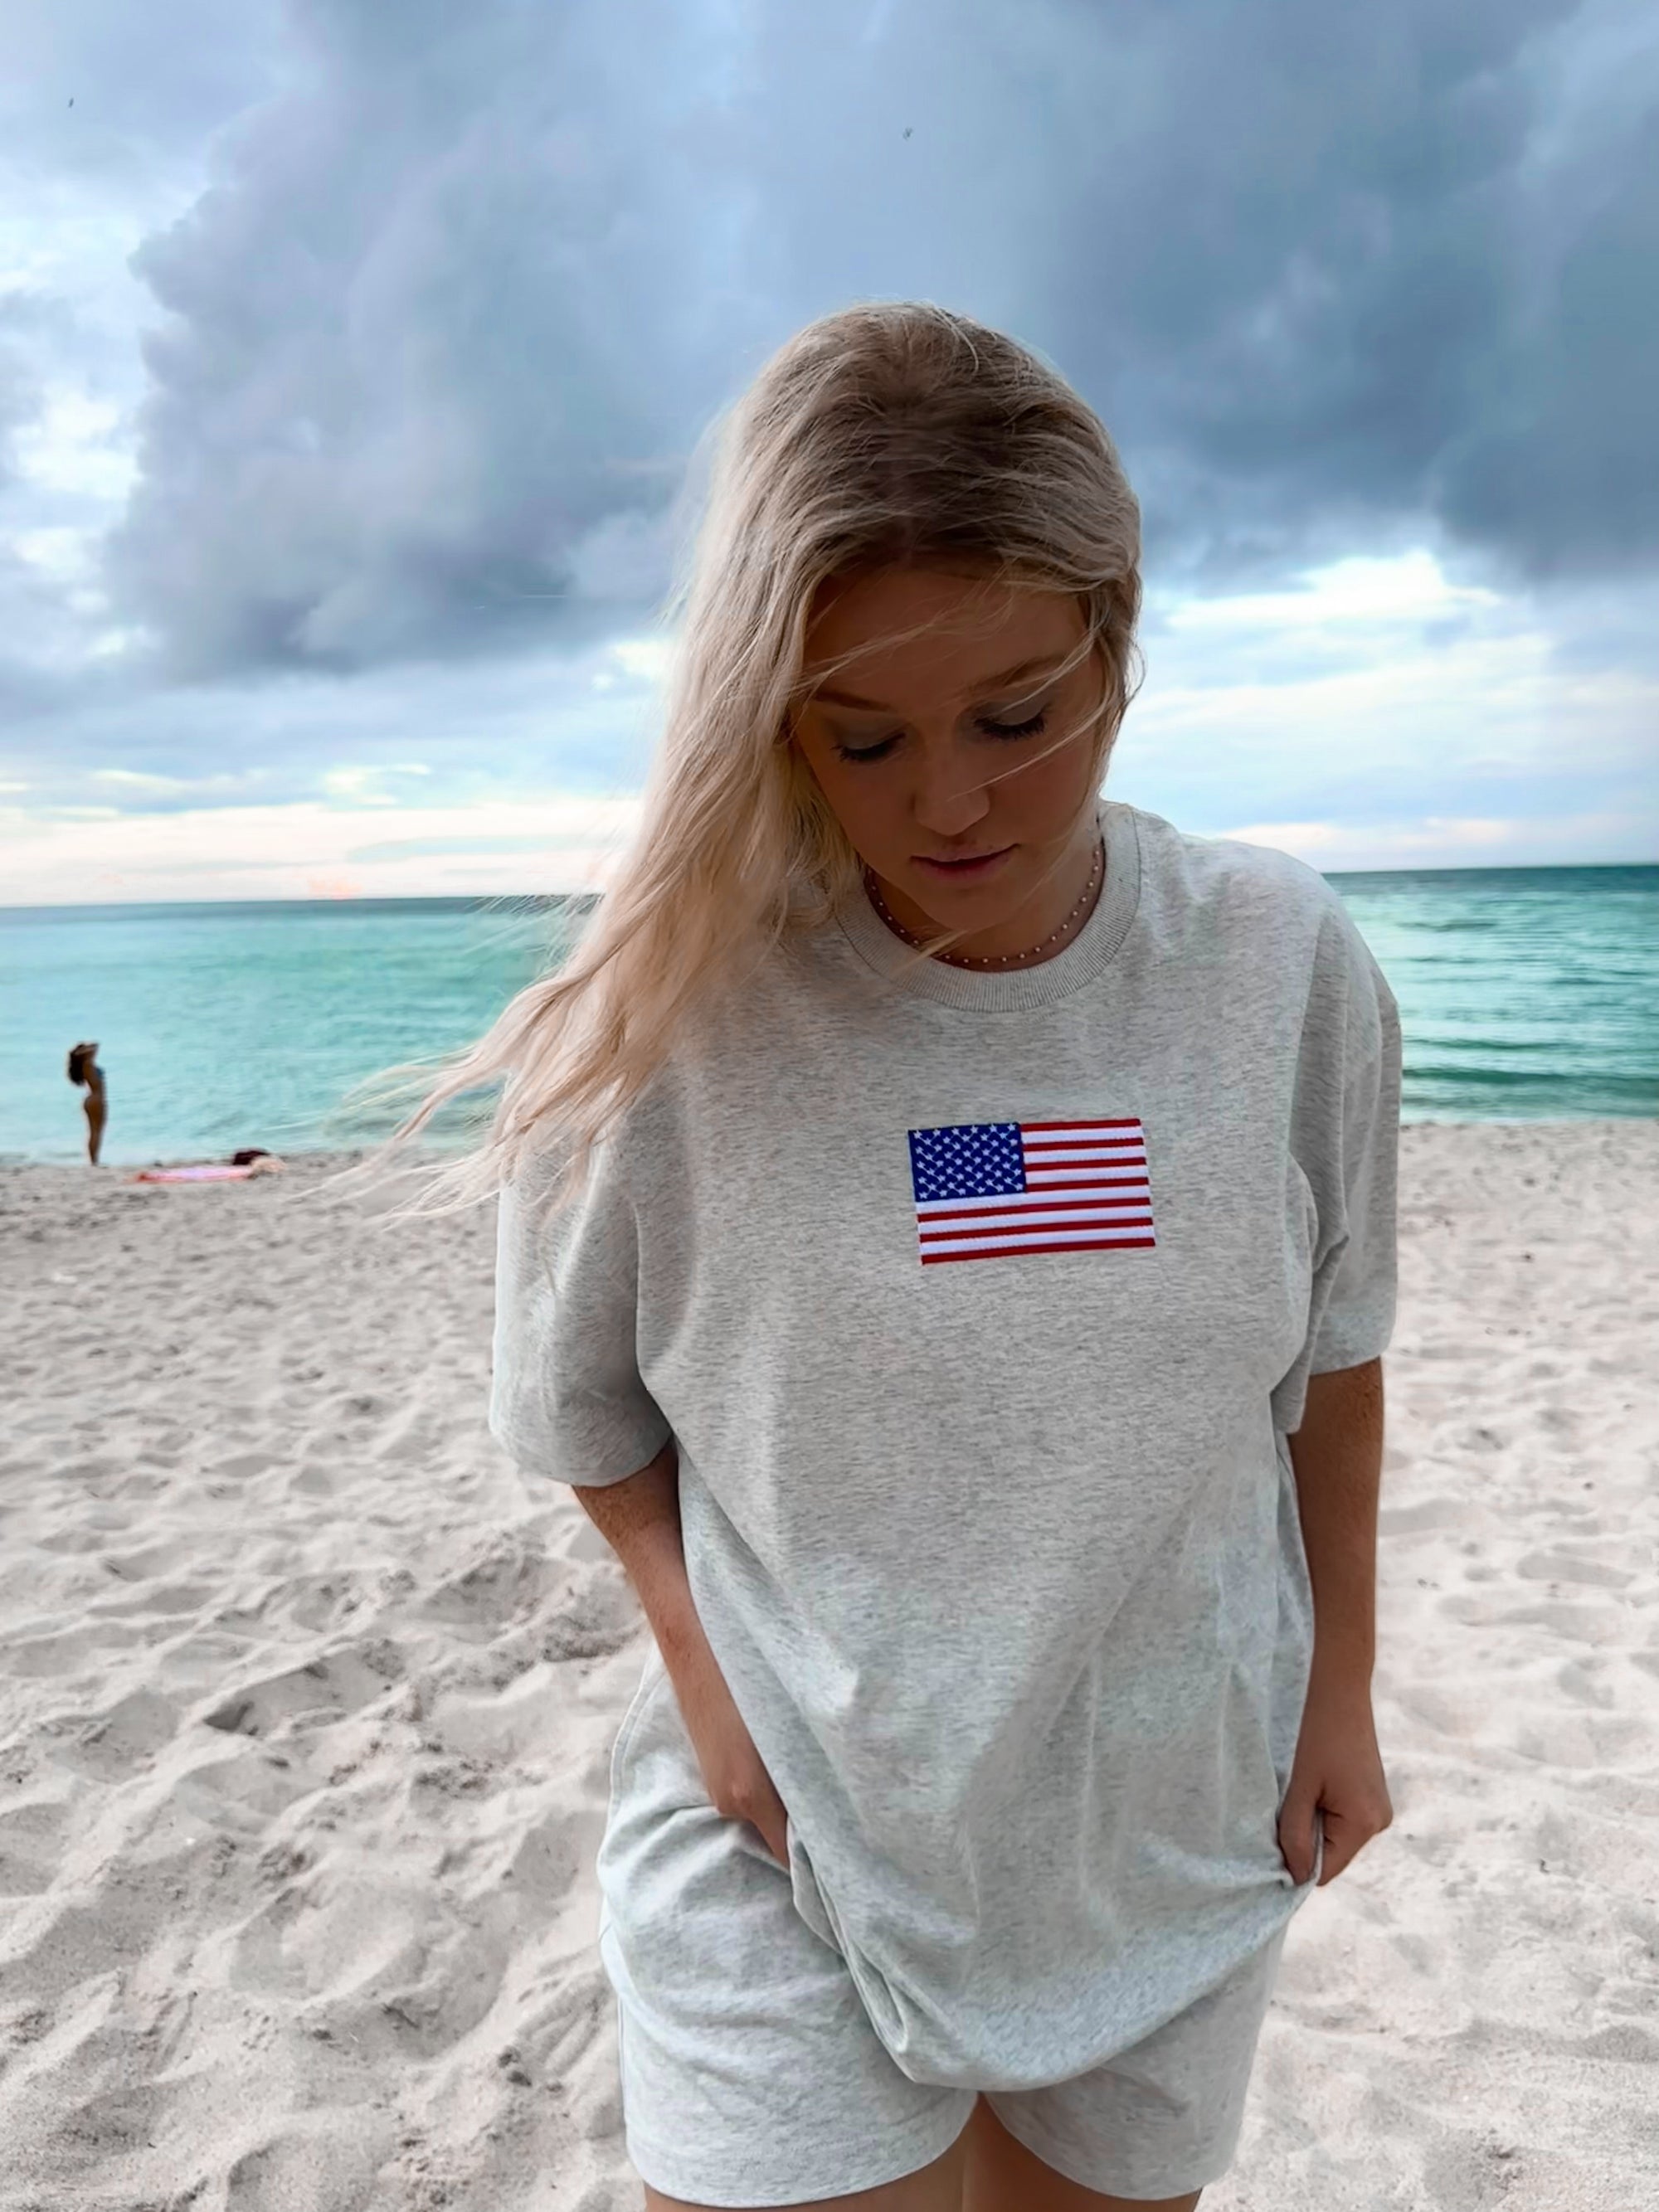 American Flag Embroider Tee